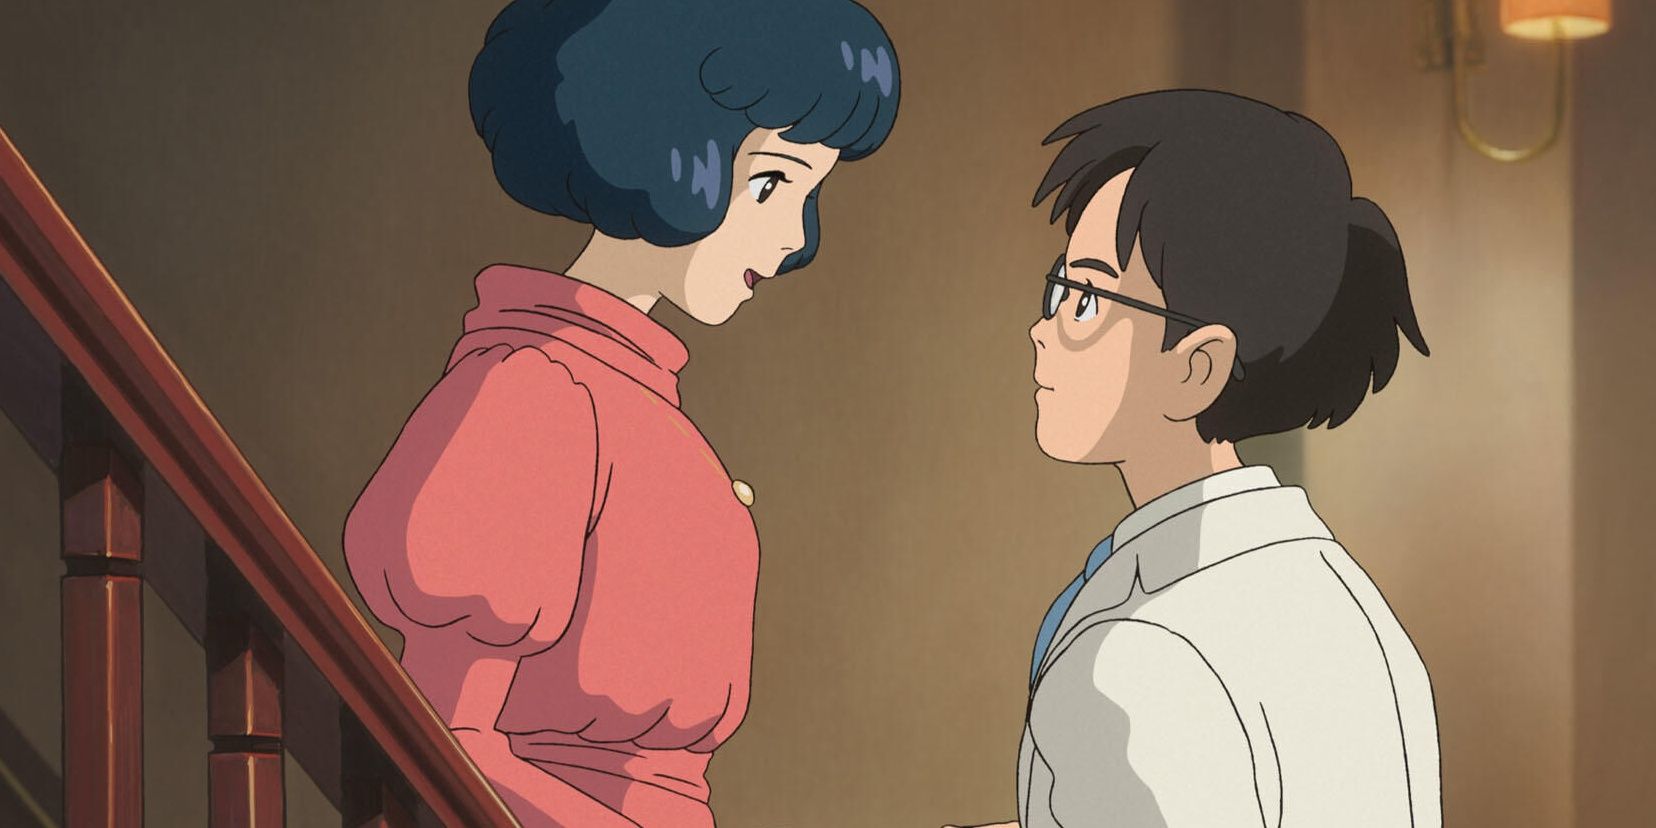 Jiro and Naoko talk on the stairs in The Wind Rises